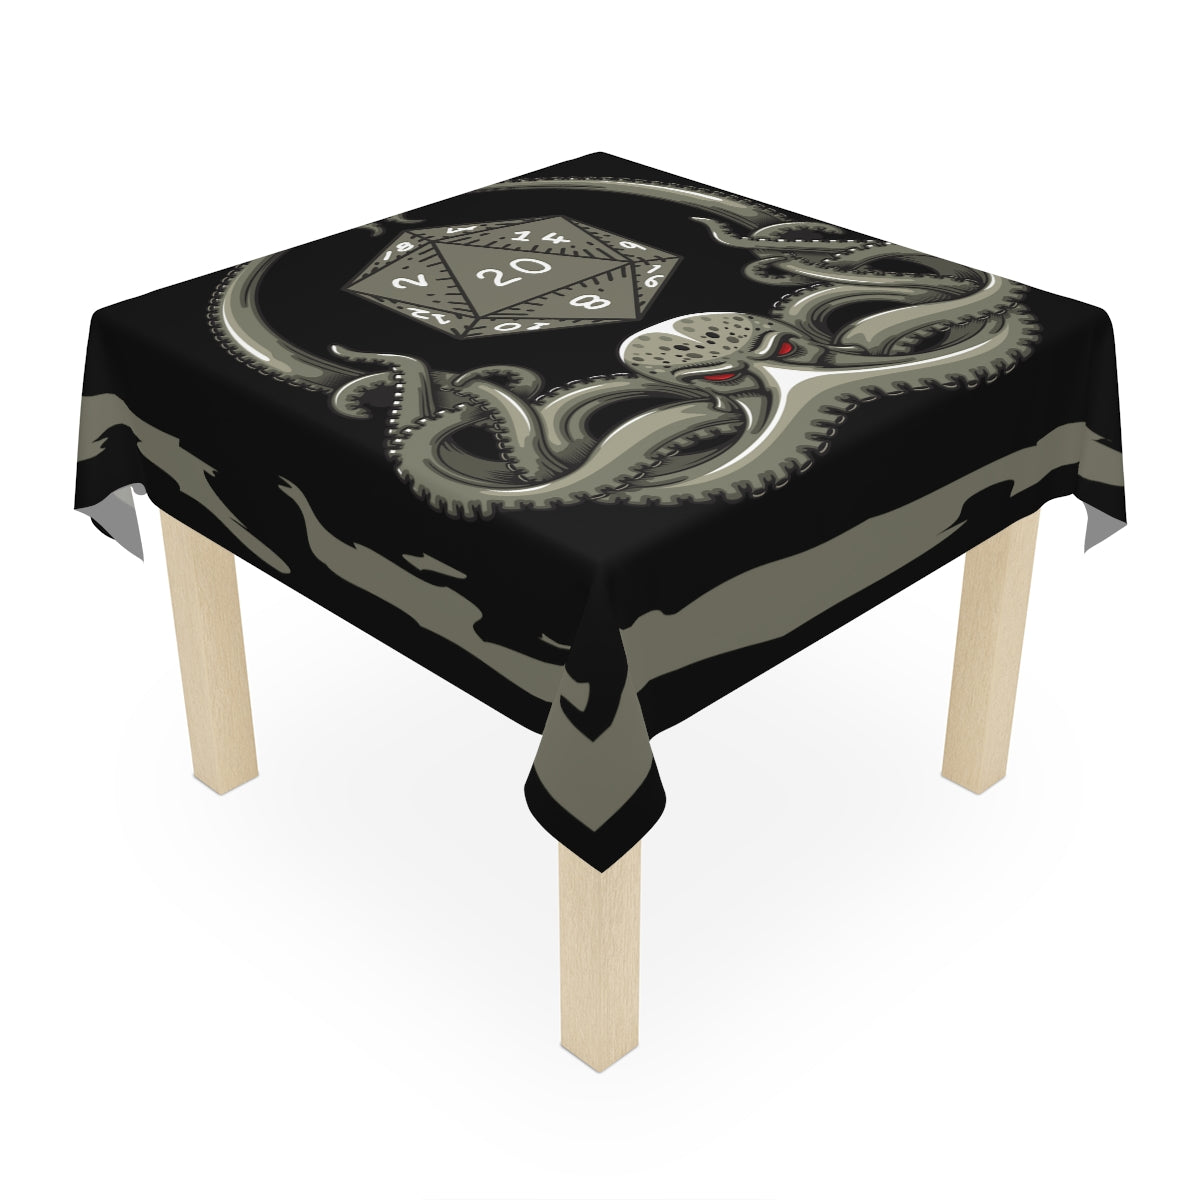 Cthulhu D20 TTRPG Gaming Table Cover